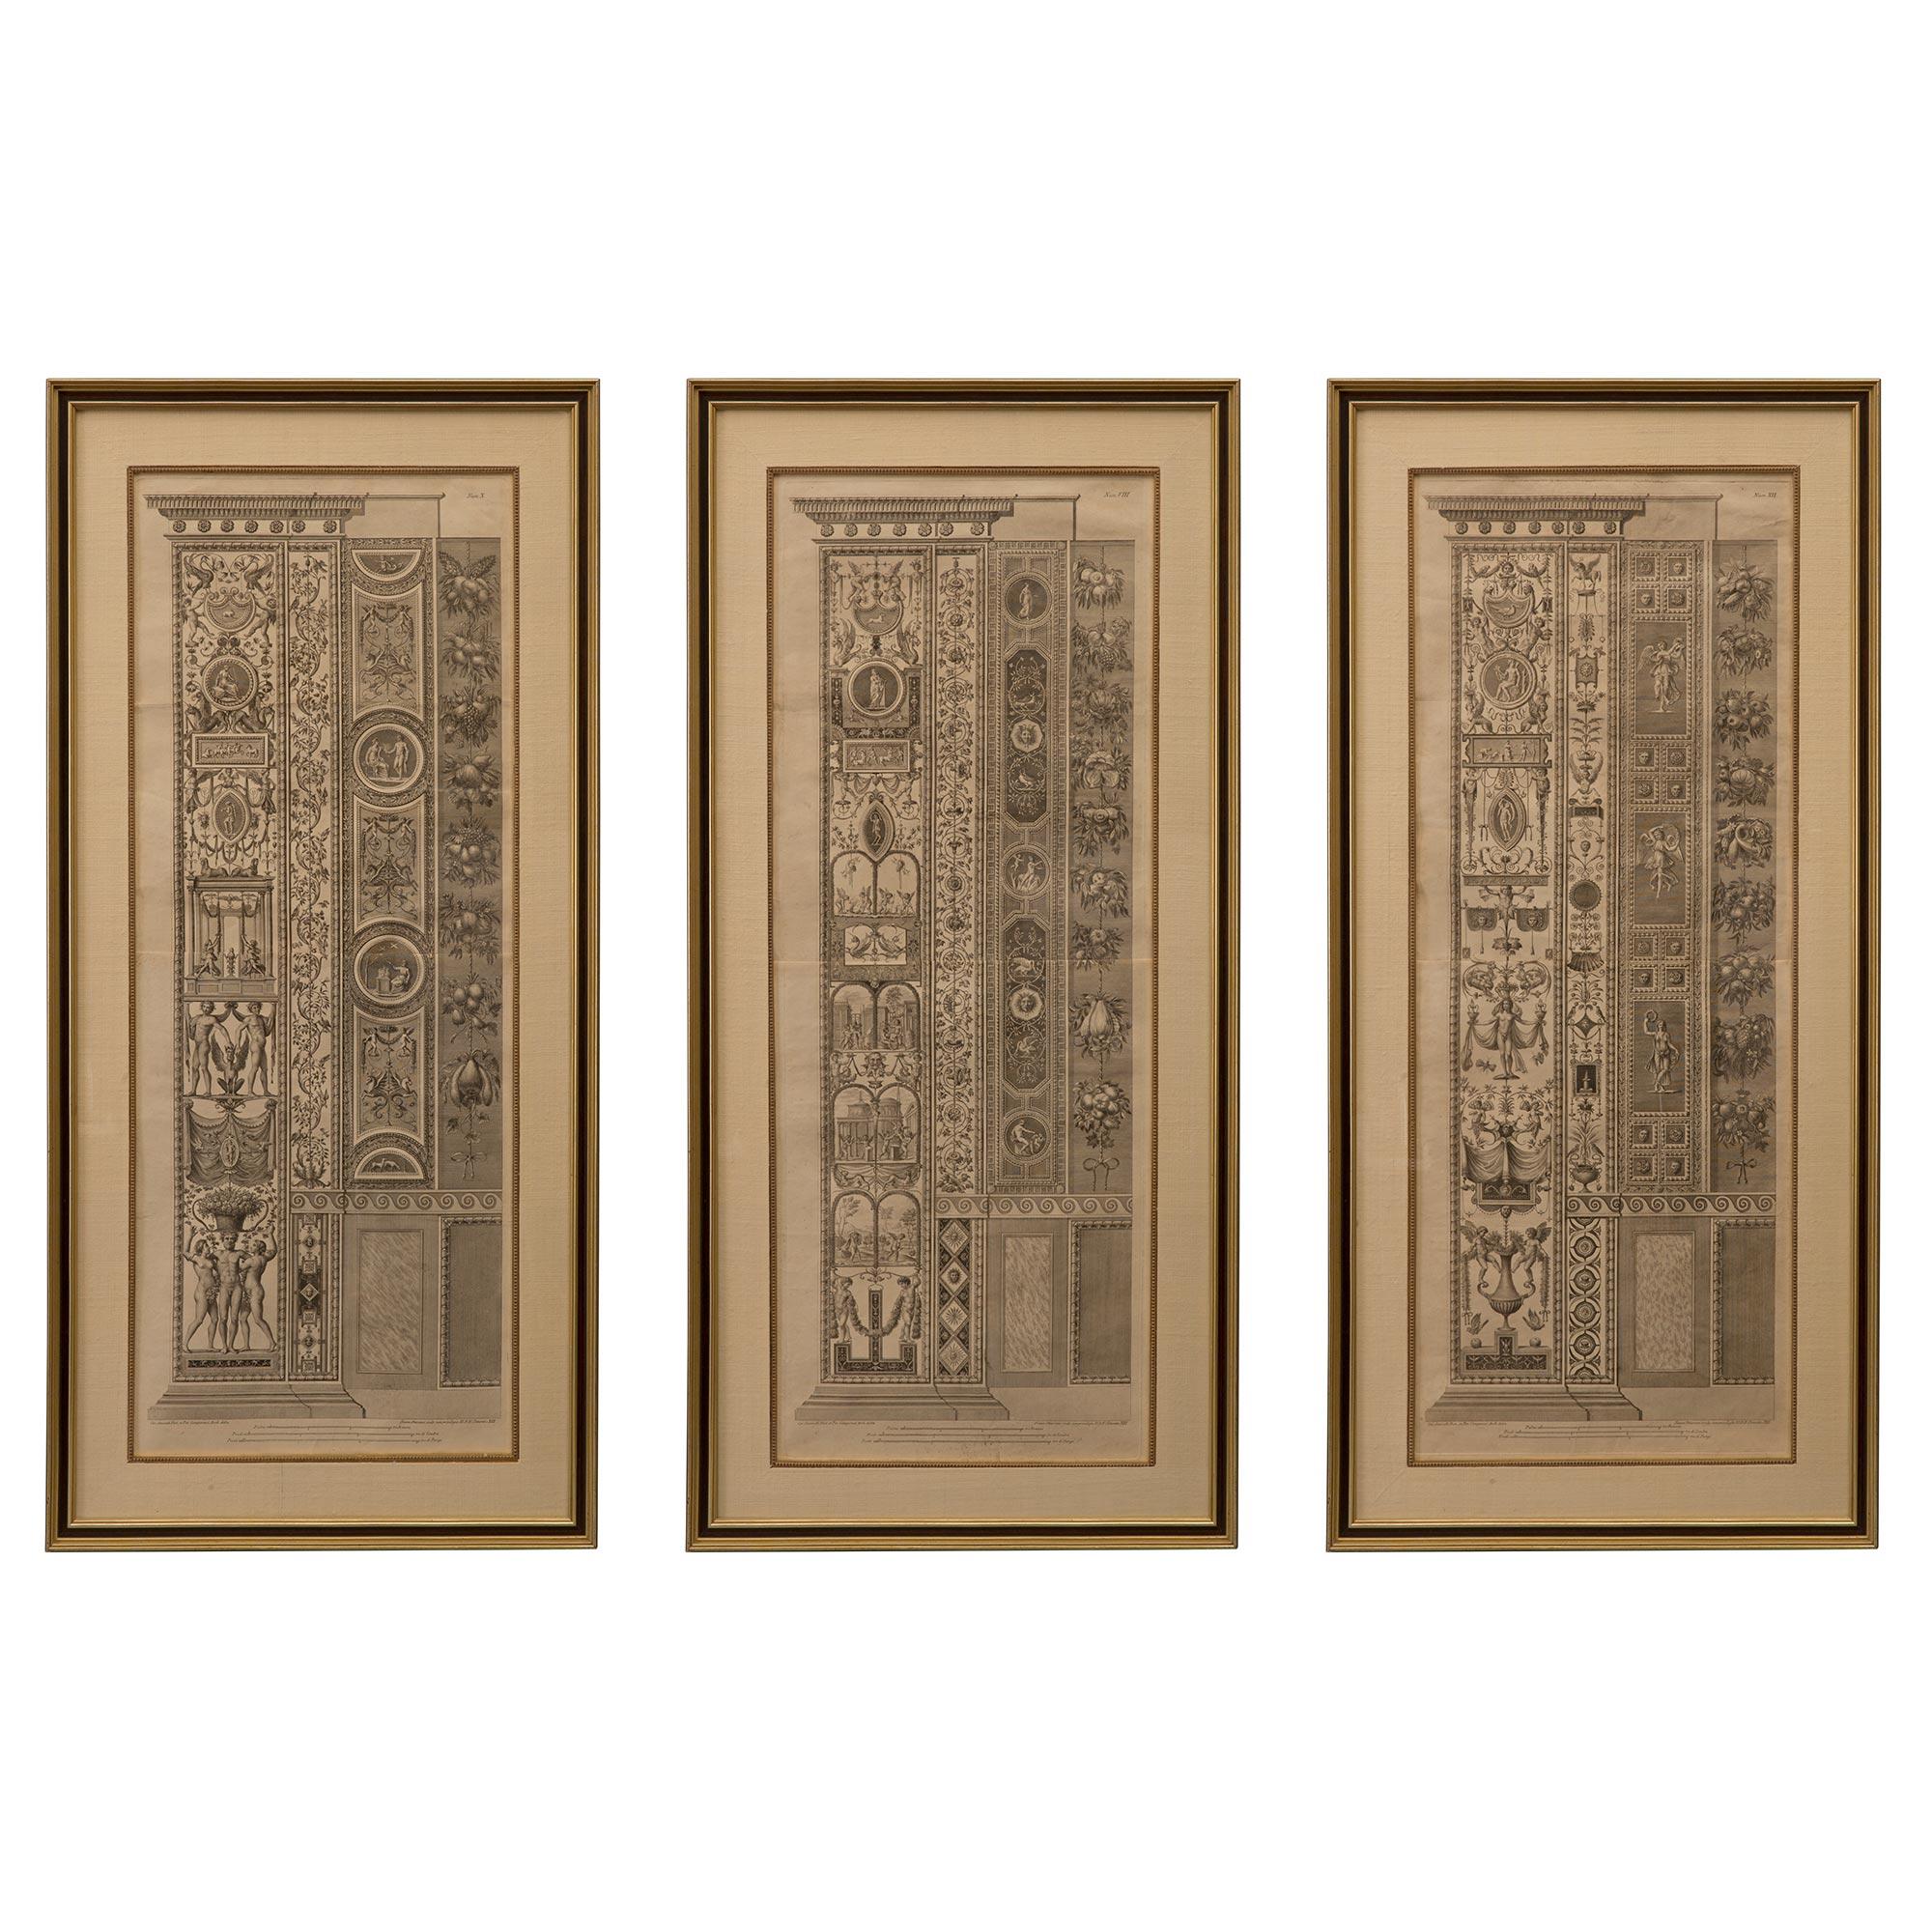 A striking set of six Italian early 19th century Neo-Classical st. architectural engravings after Giovanni Ottaviani. Each beautiful and most decorative rectangular engraving depicts lovely architectural scenes with charming and intricately detailed